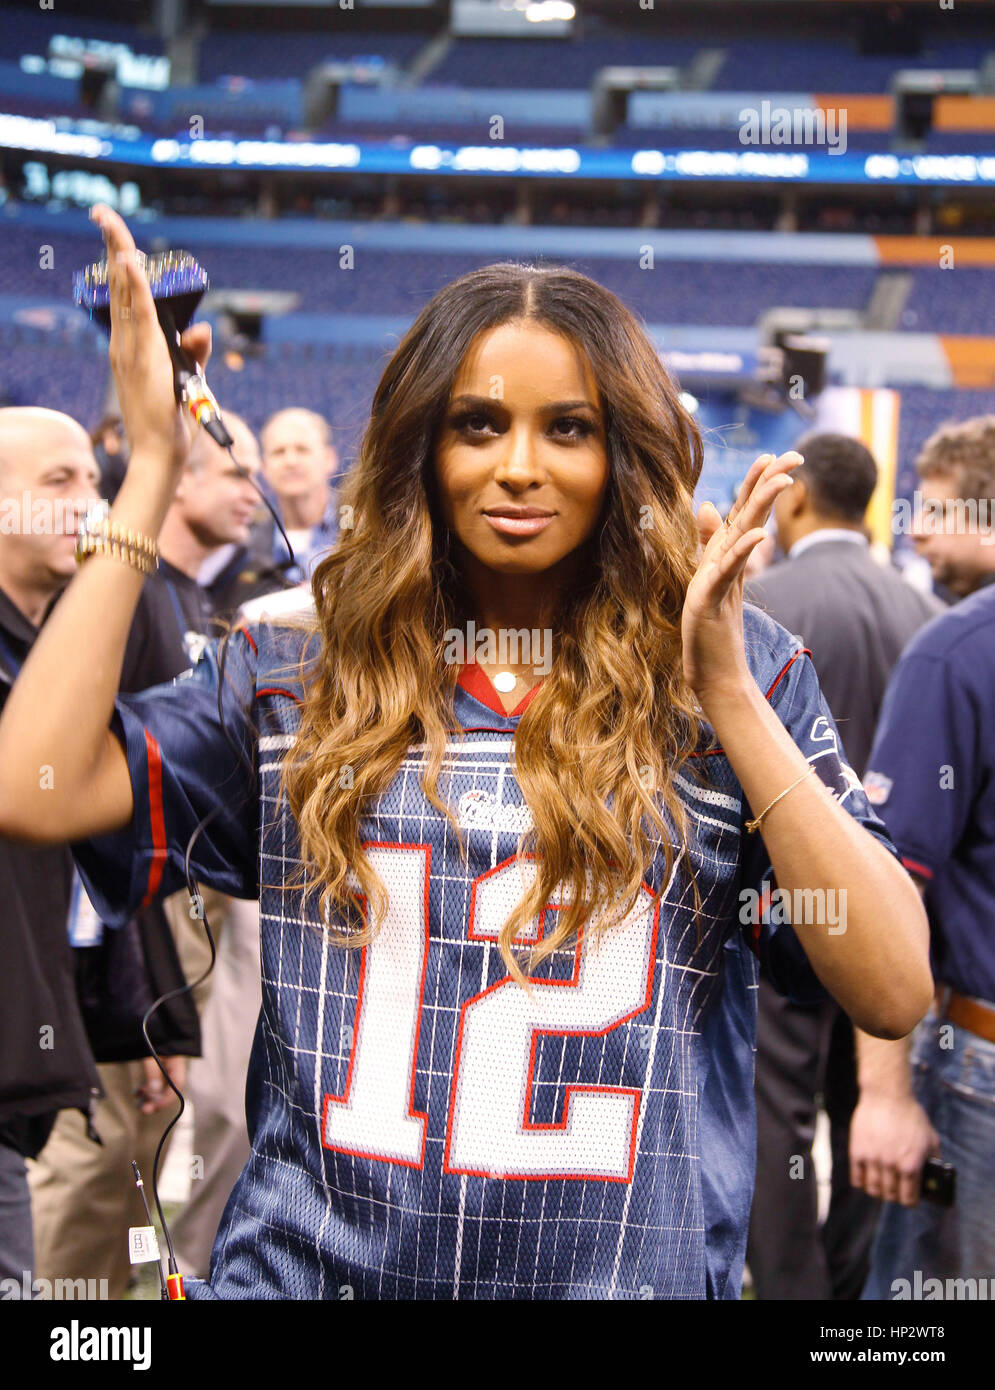 Singer Ciara does a Madonna vogue dance at the Super Bowl XLVI Media Day in Indianapolis, Indiana on January 31, 2012. Francis Specker Stock Photo